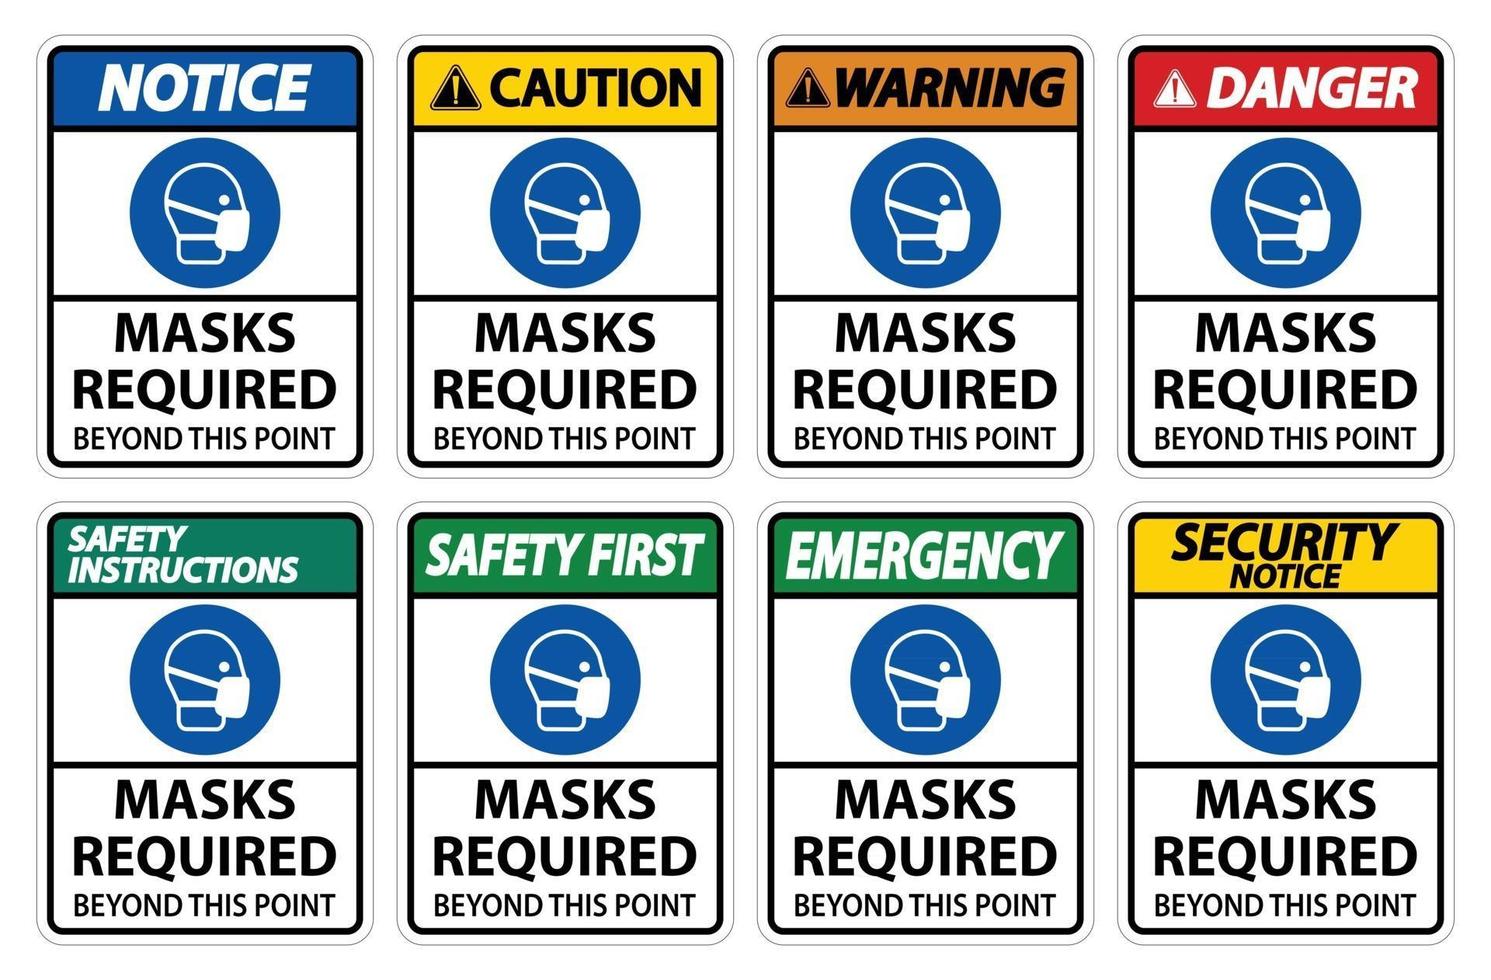 Masks Required Beyond This Point Sign Isolate On White Background,Vector Illustration EPS.10 vector